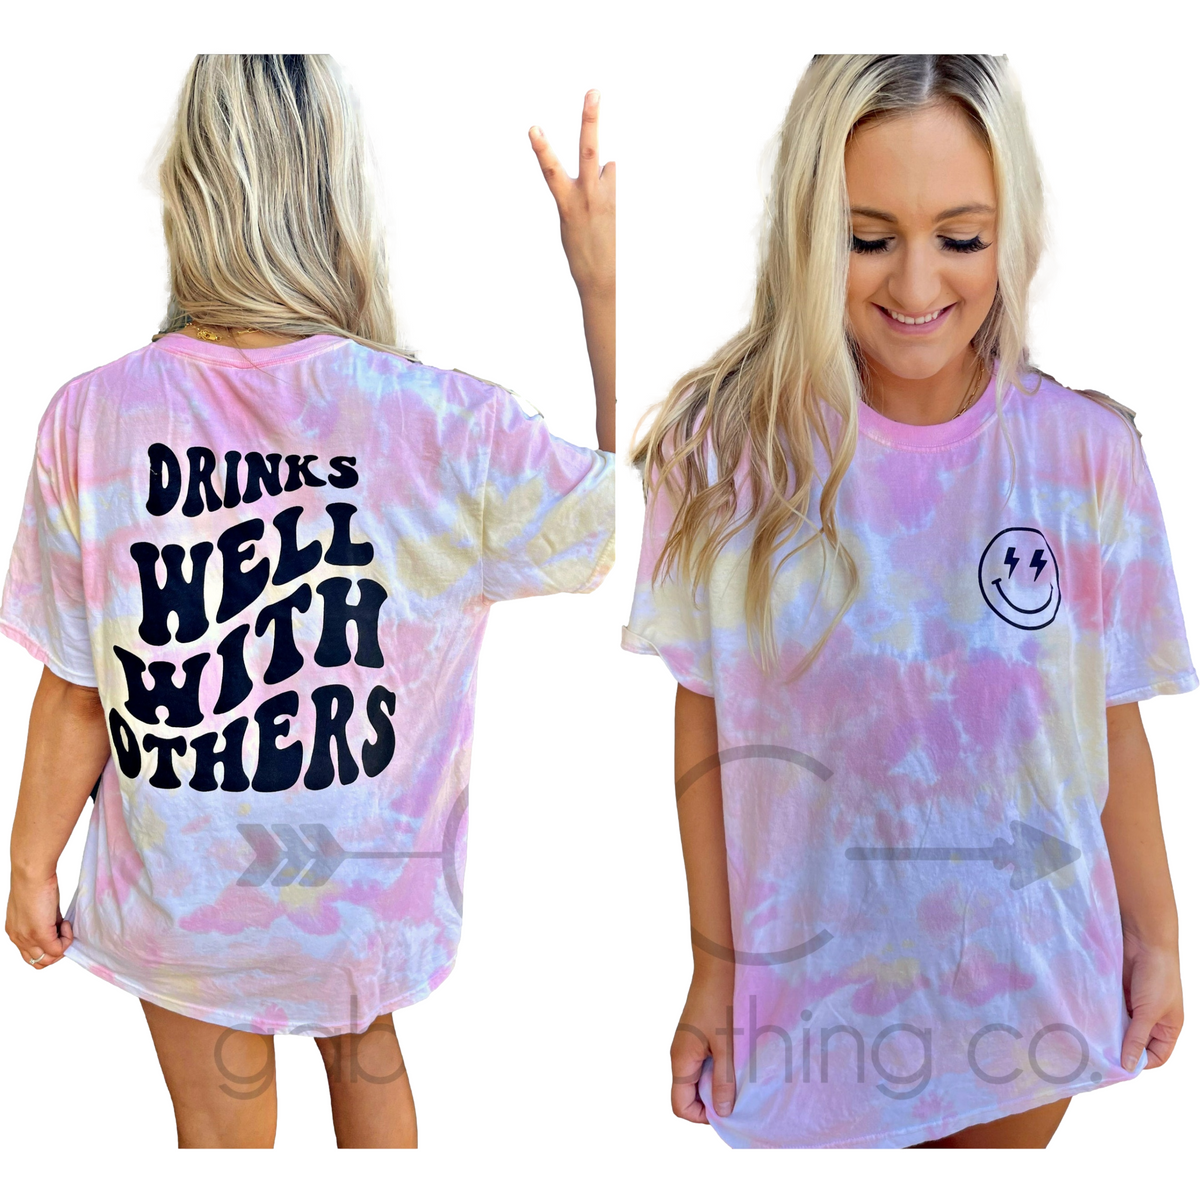 Drinks Well With Others Smiley Tee